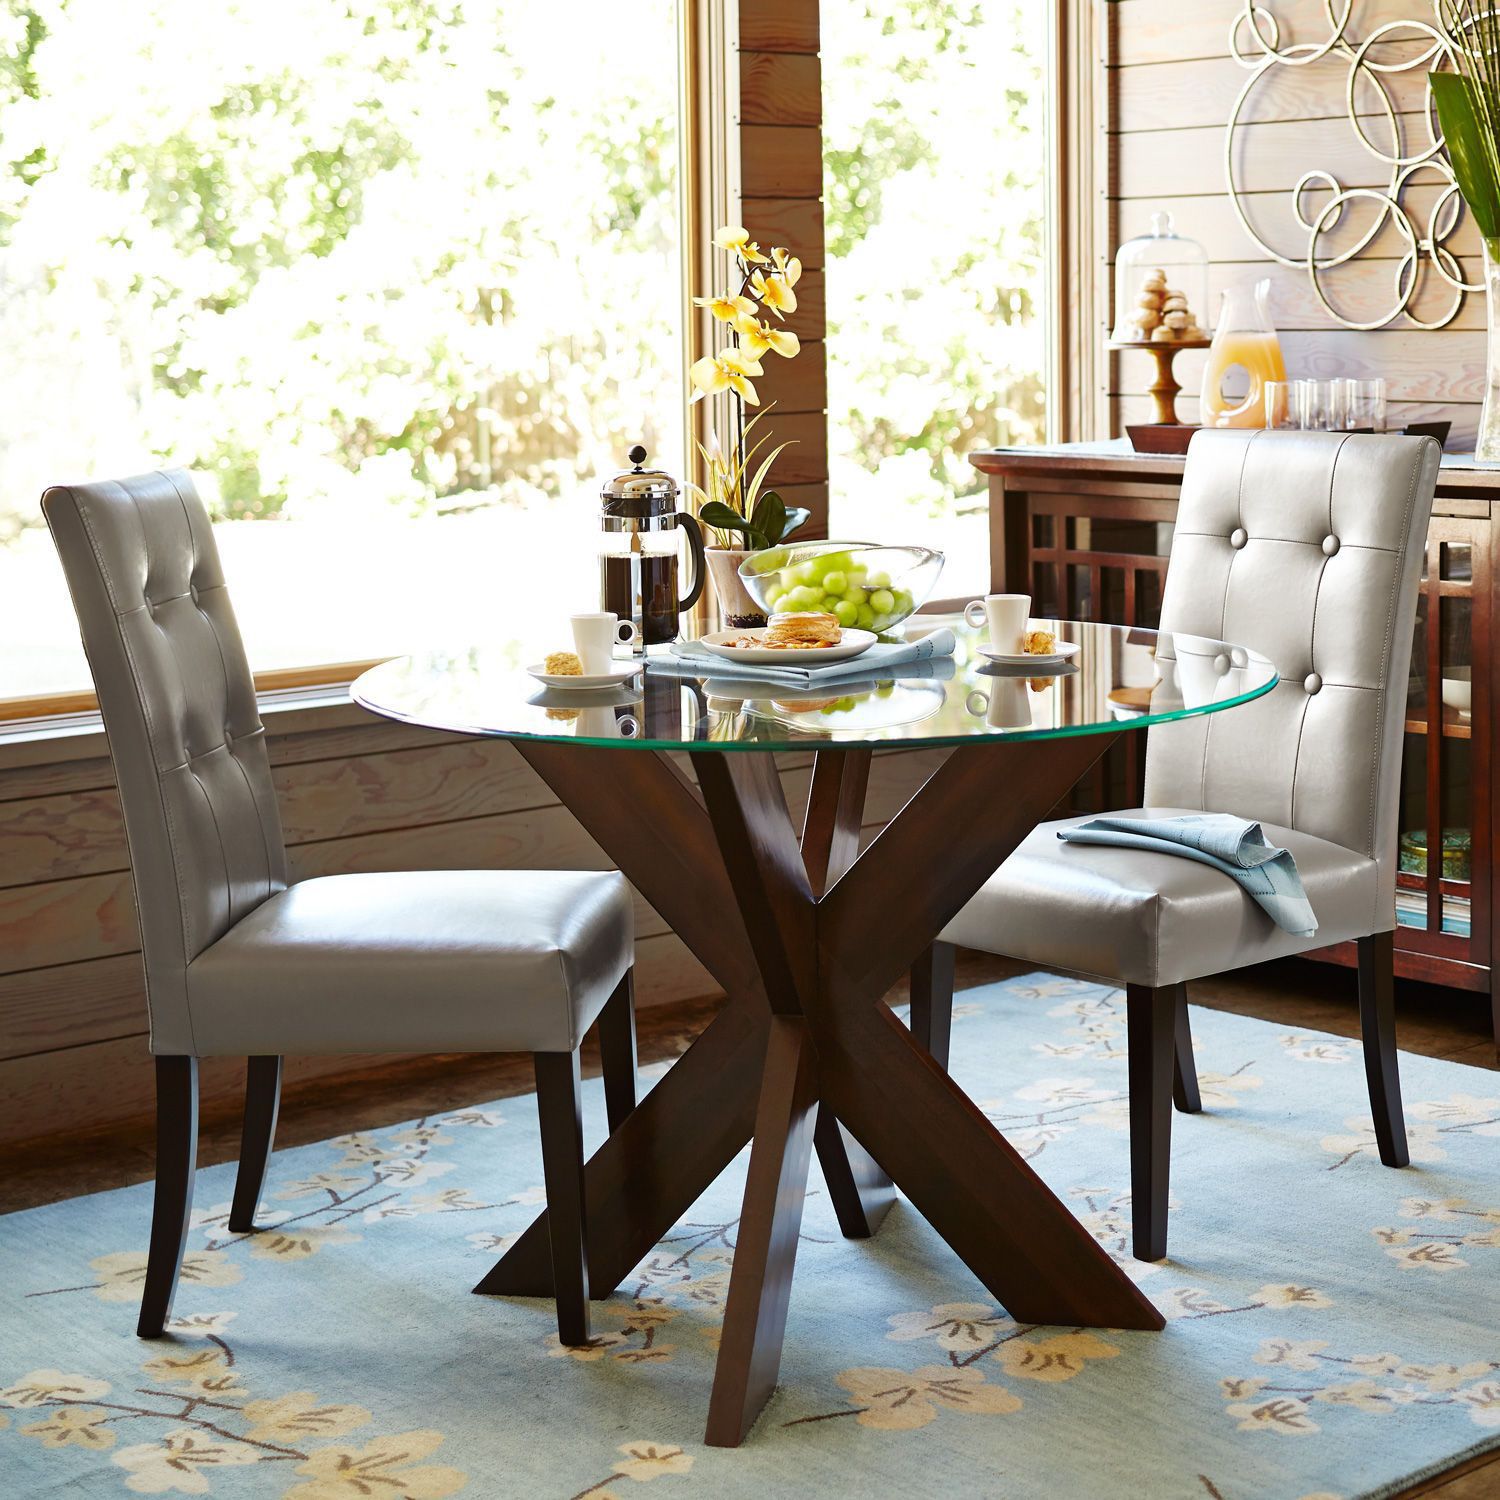 Pier One Simone X Table Espresso Legs With Glass Top And 4 Dining Chairs